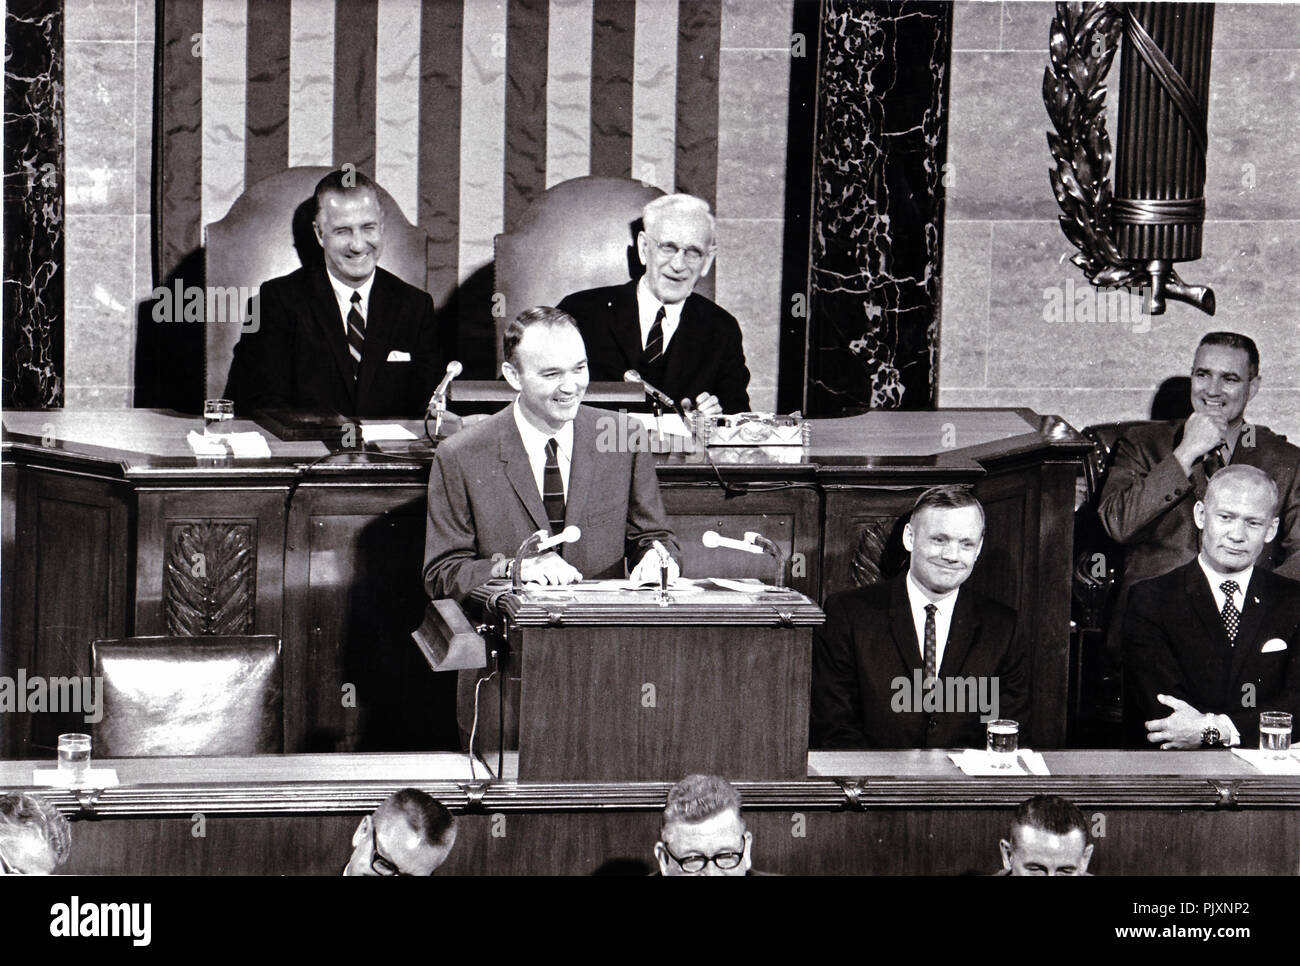 Washington, DC - (FILE) -- Apollo 11 Astronaut Michael L. Collins addresses a Joint Session of Congress on September 16, 1969.  Astronauts (L-R) Neil Armstrong, and Edwin E. Aldrin, Jr.  Congress honored the Astronauts for their historic flight to the Moon and return. Credit: NASA via CNP /MediaPunch Stock Photo